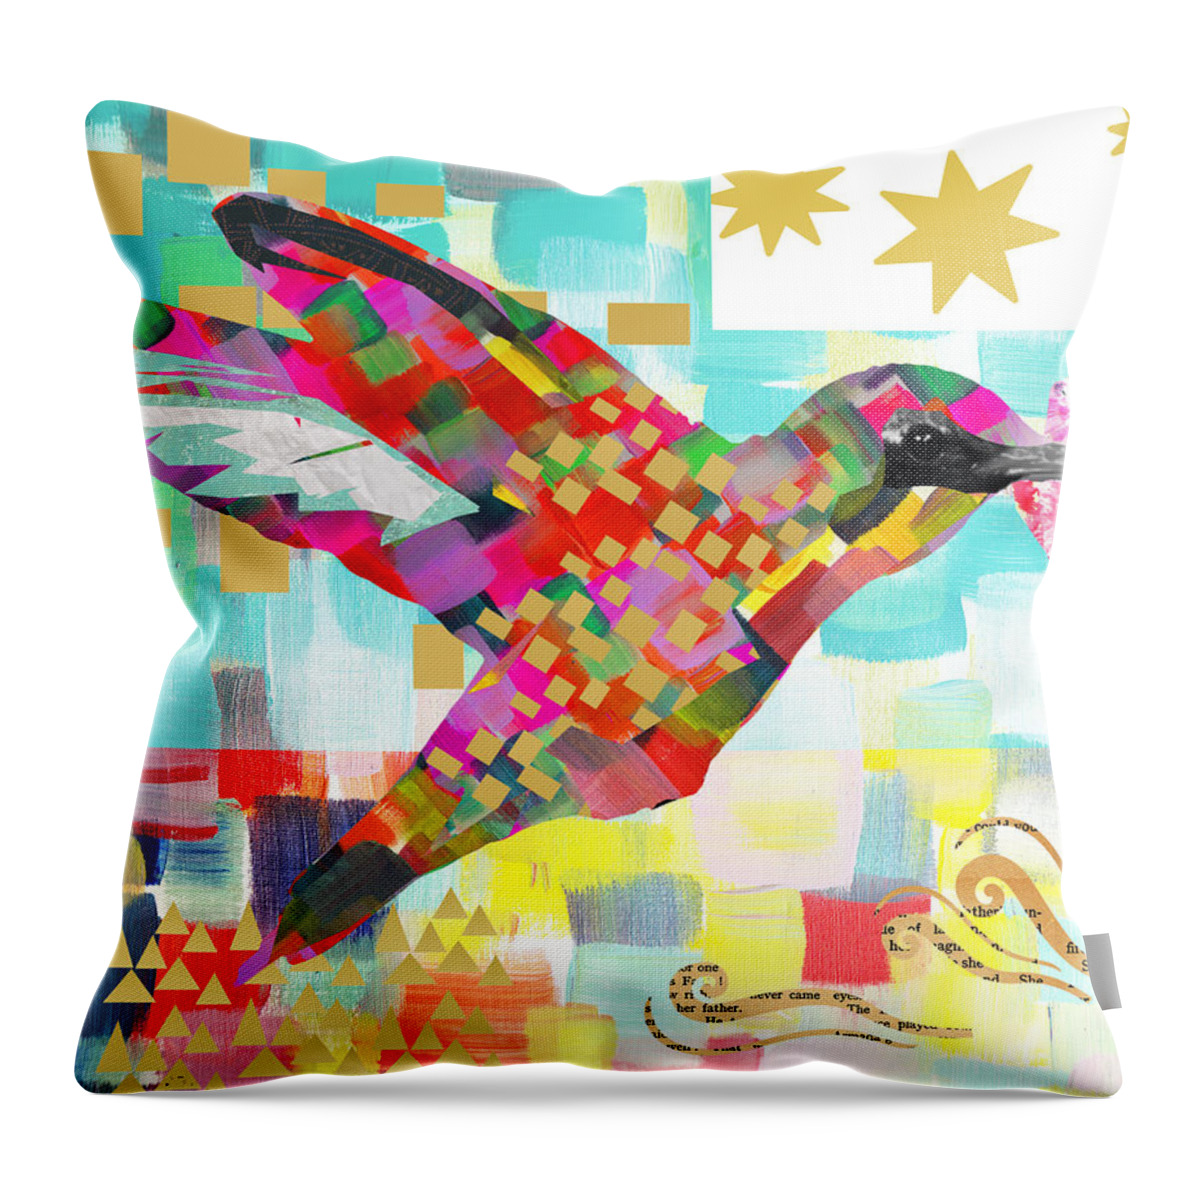 Humming Bird Collage Throw Pillow featuring the mixed media Humming Bird by Claudia Schoen